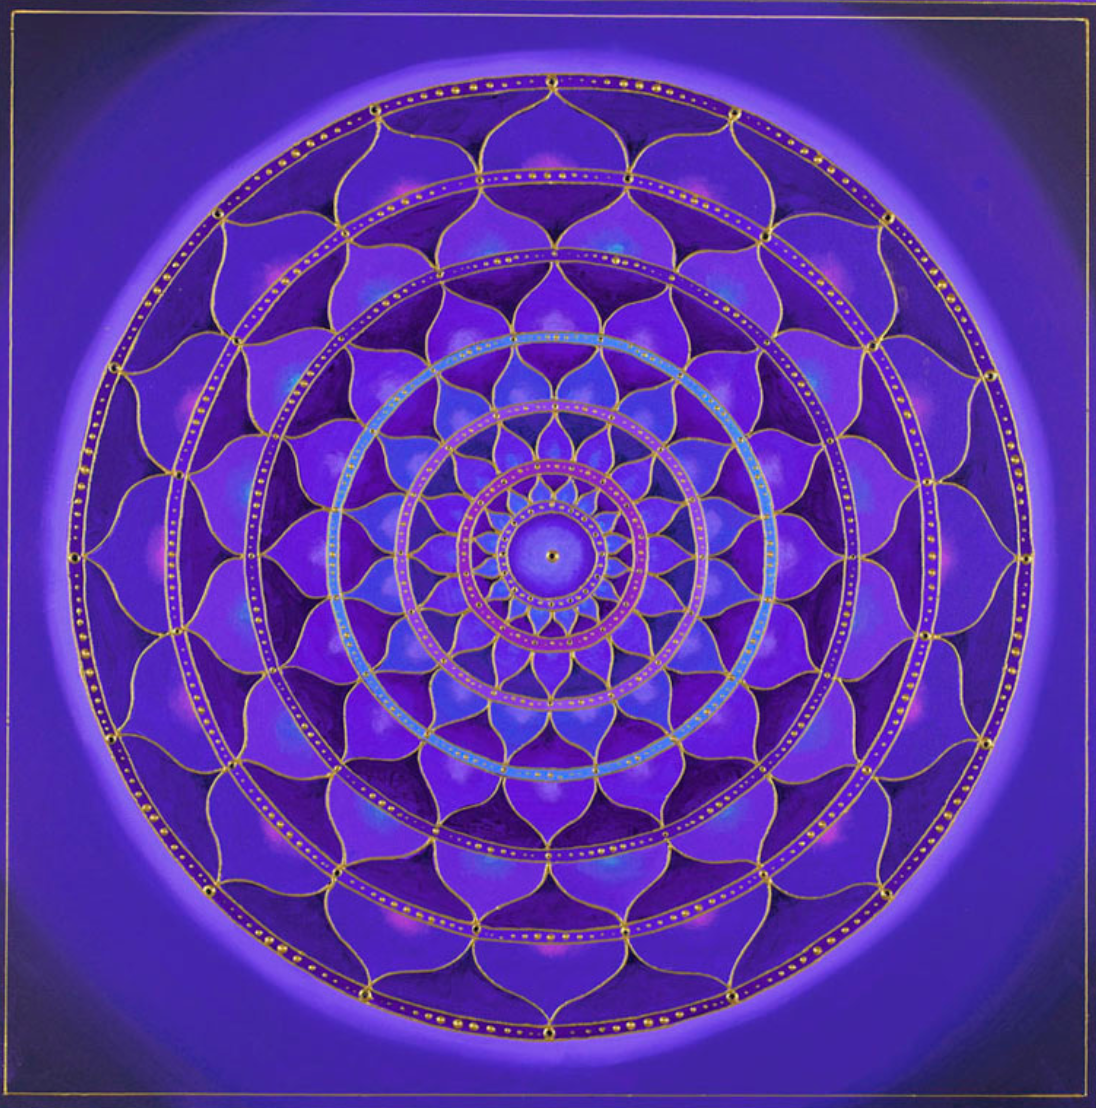 The Crown Chakra is the gateway to Source Energy. Medtition on it improves intuition, raises your vibration, Spiritual Guidance, and energy healing.